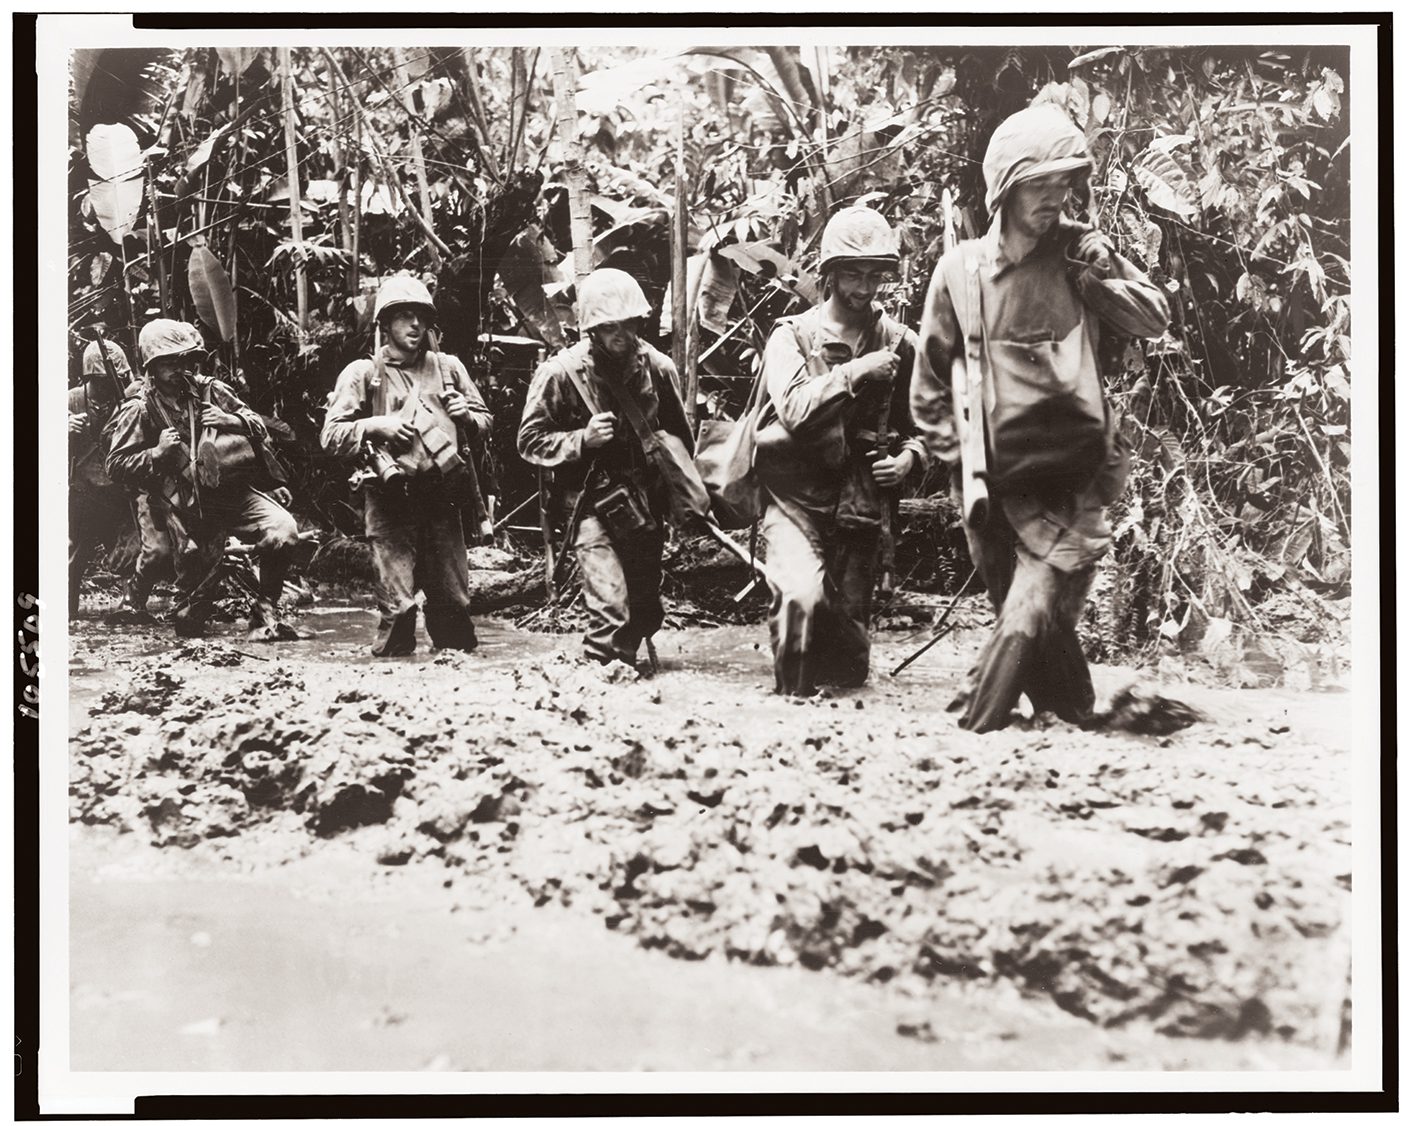 A sepia photo from 1943 shows US marines marching through mud on Bougainville Island, Solomon Islands.